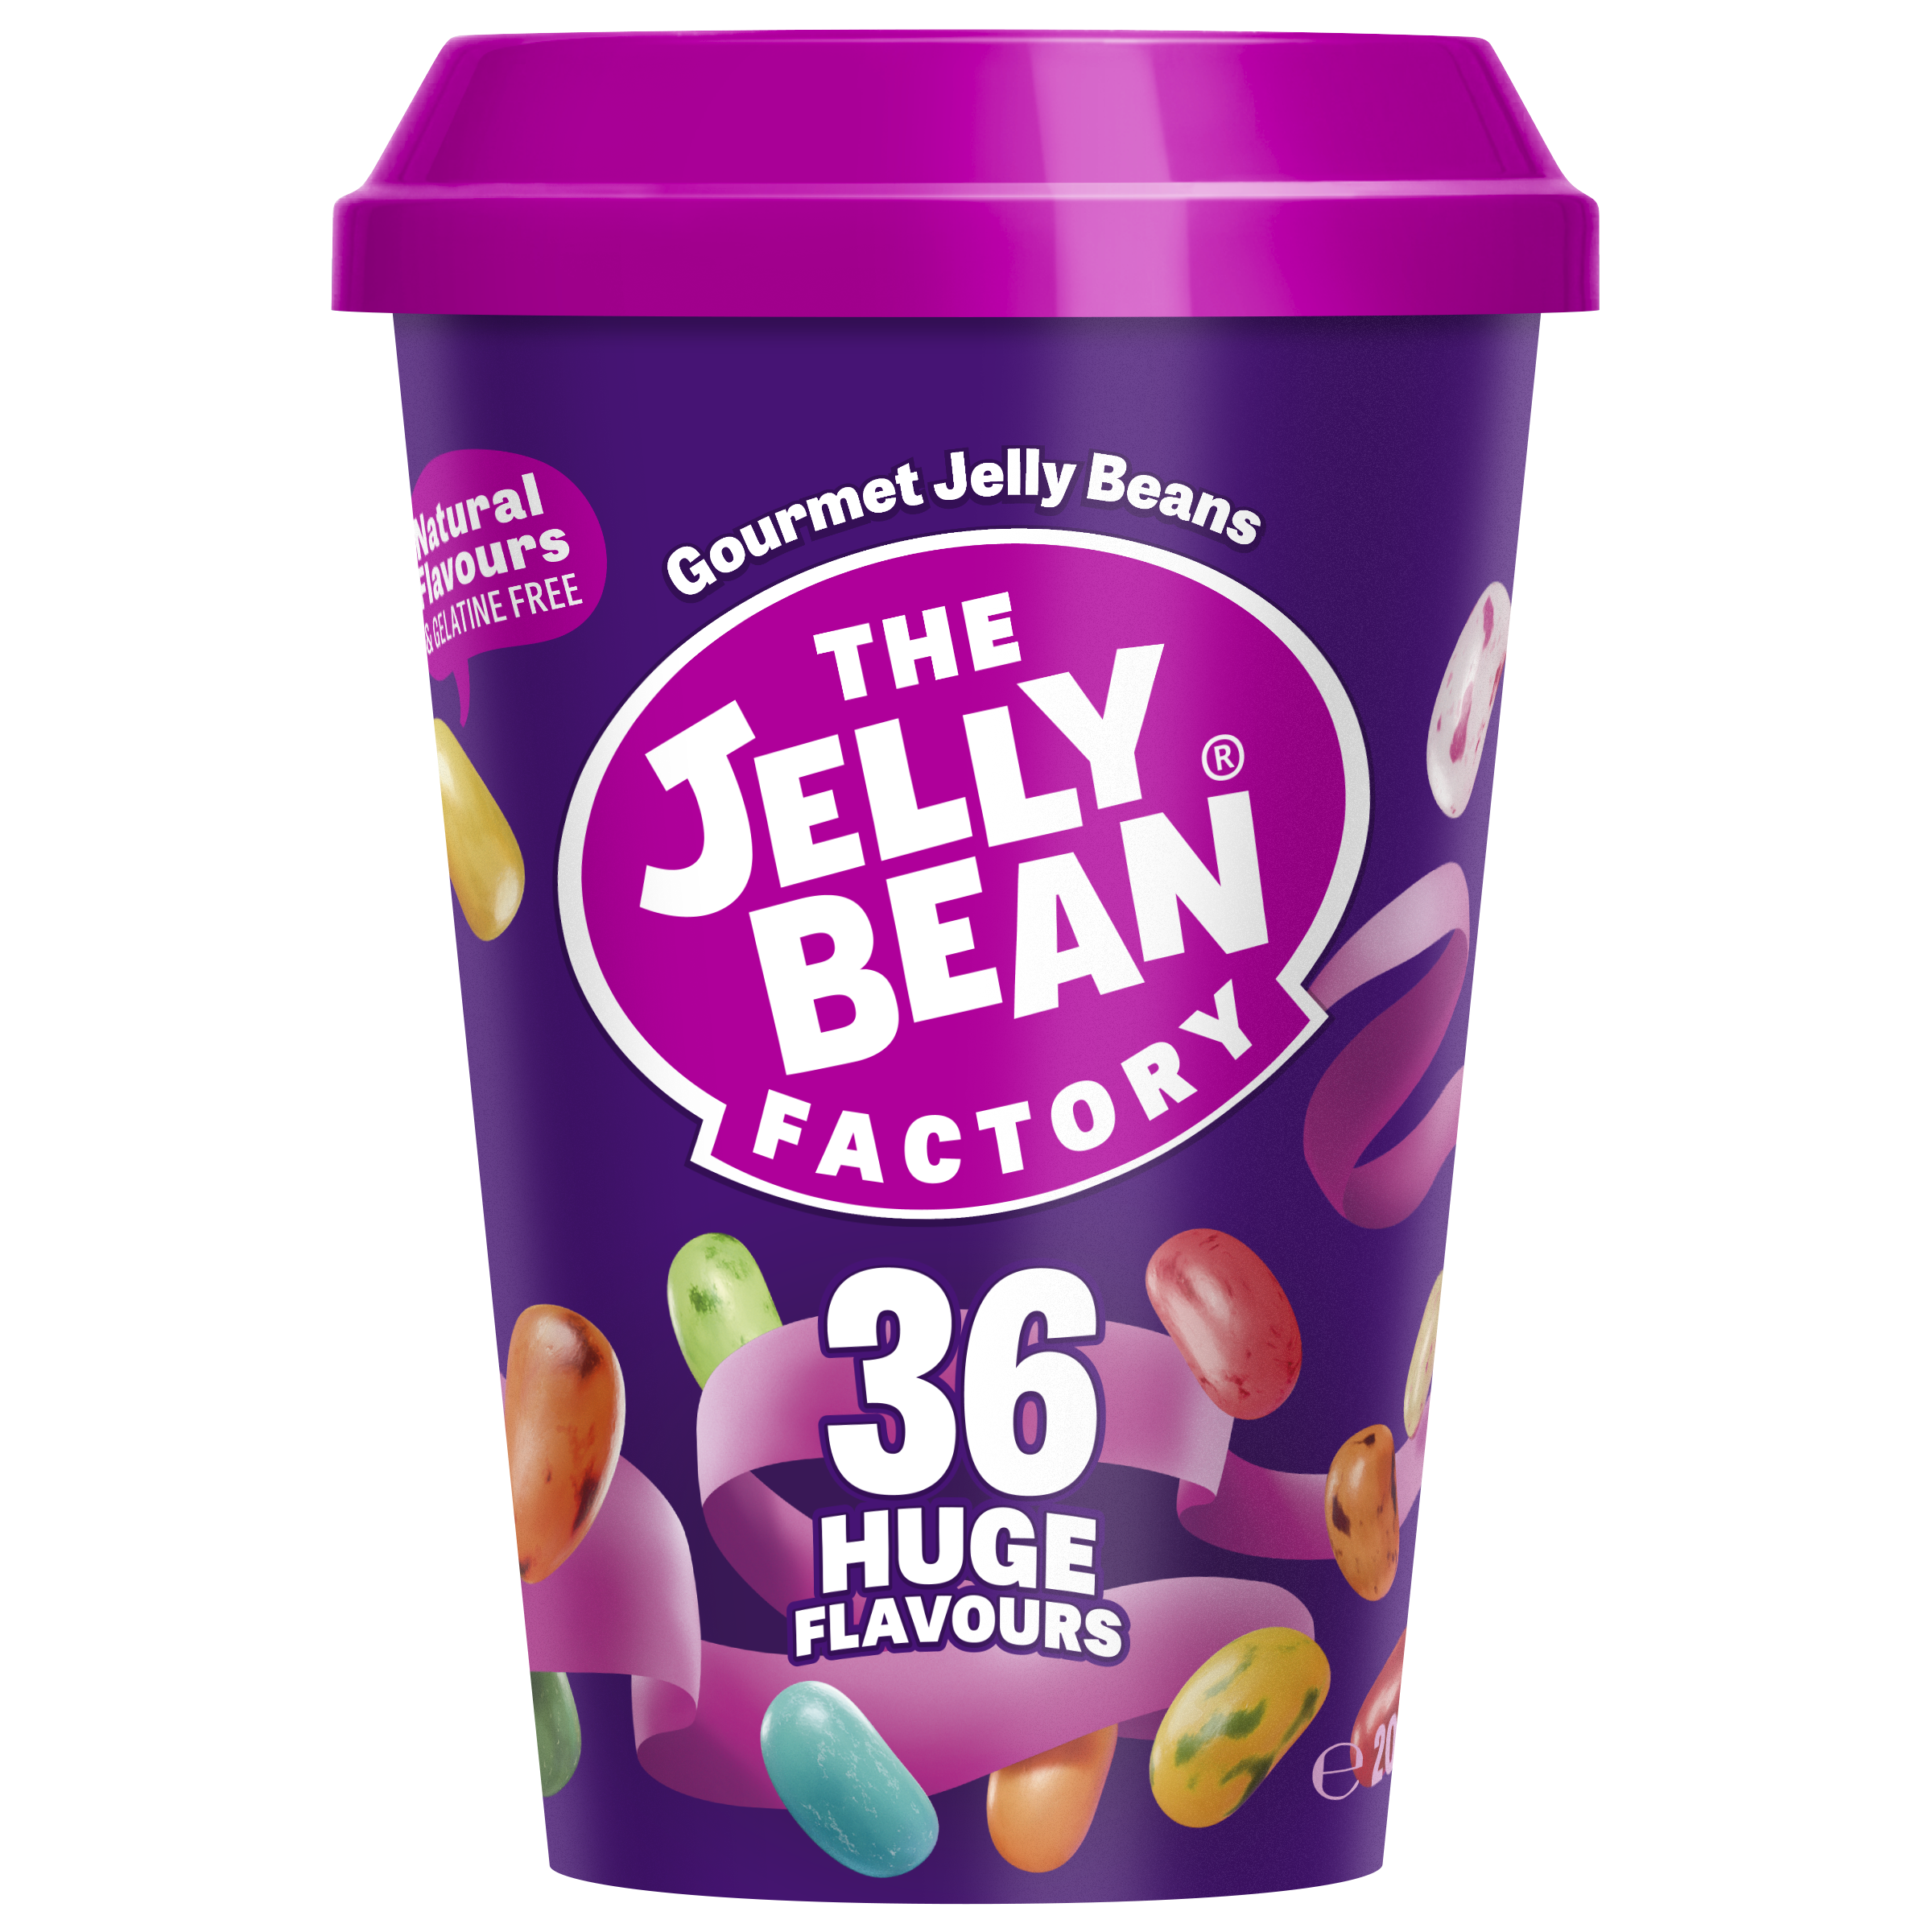 The Jelly Bean Factory - 36 Gourmet Flavours - Jar - 700g